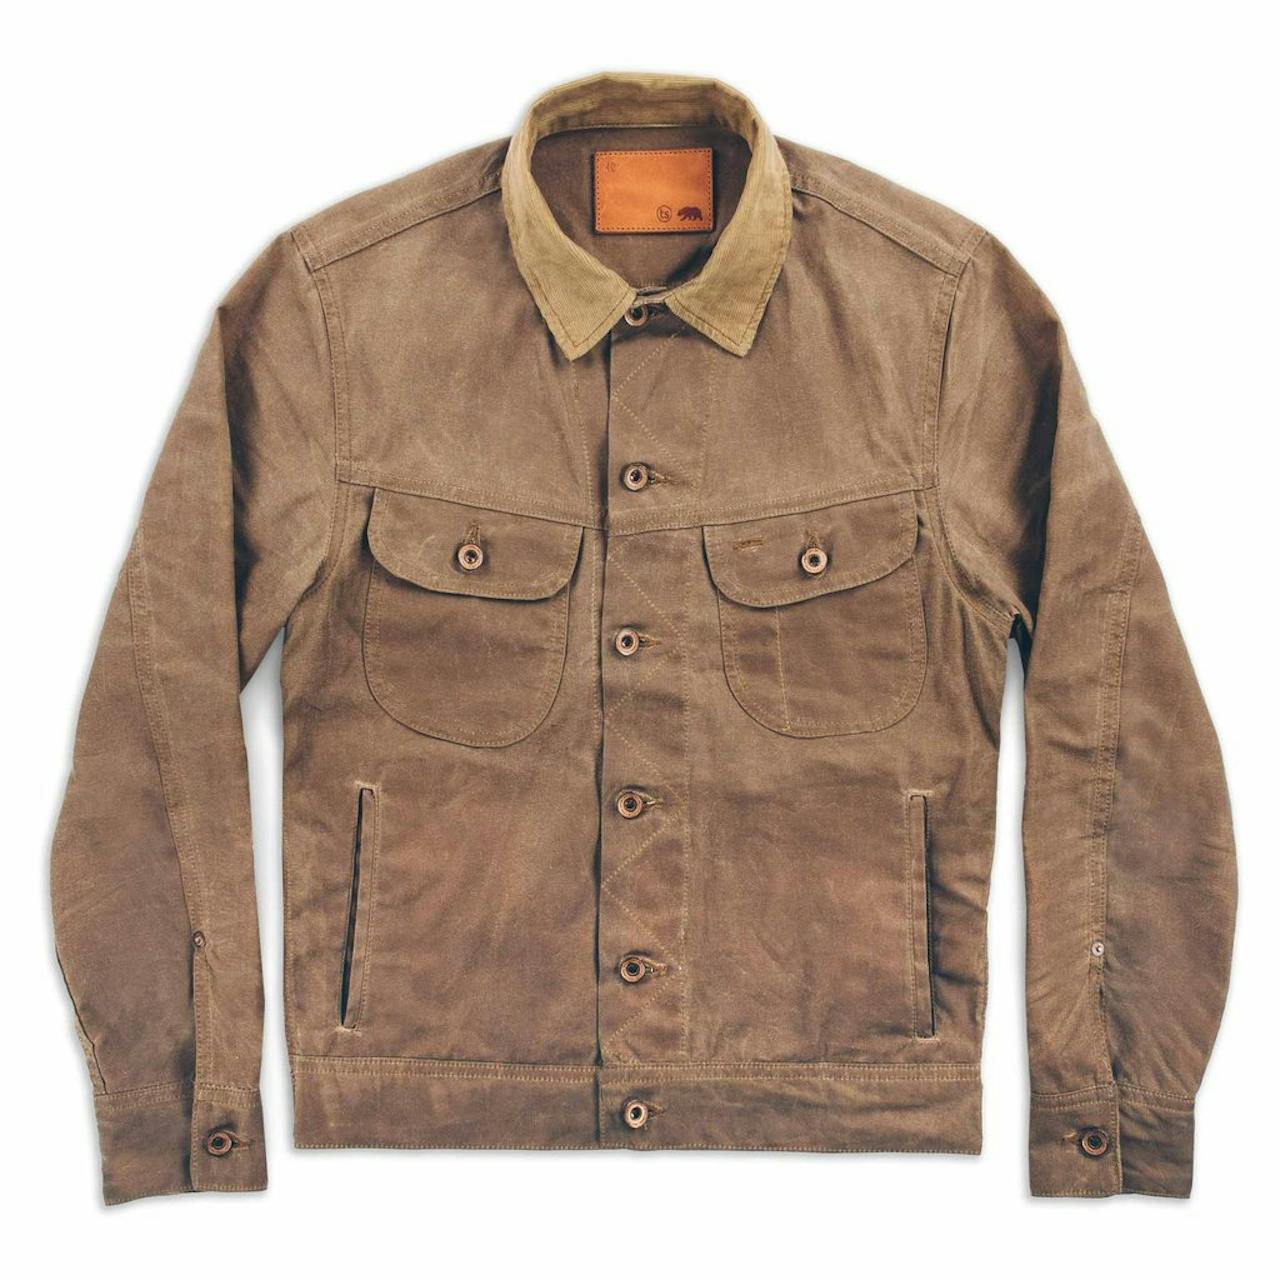 Taylor Stitch The Long Haul Jacket - Waxed Canvas